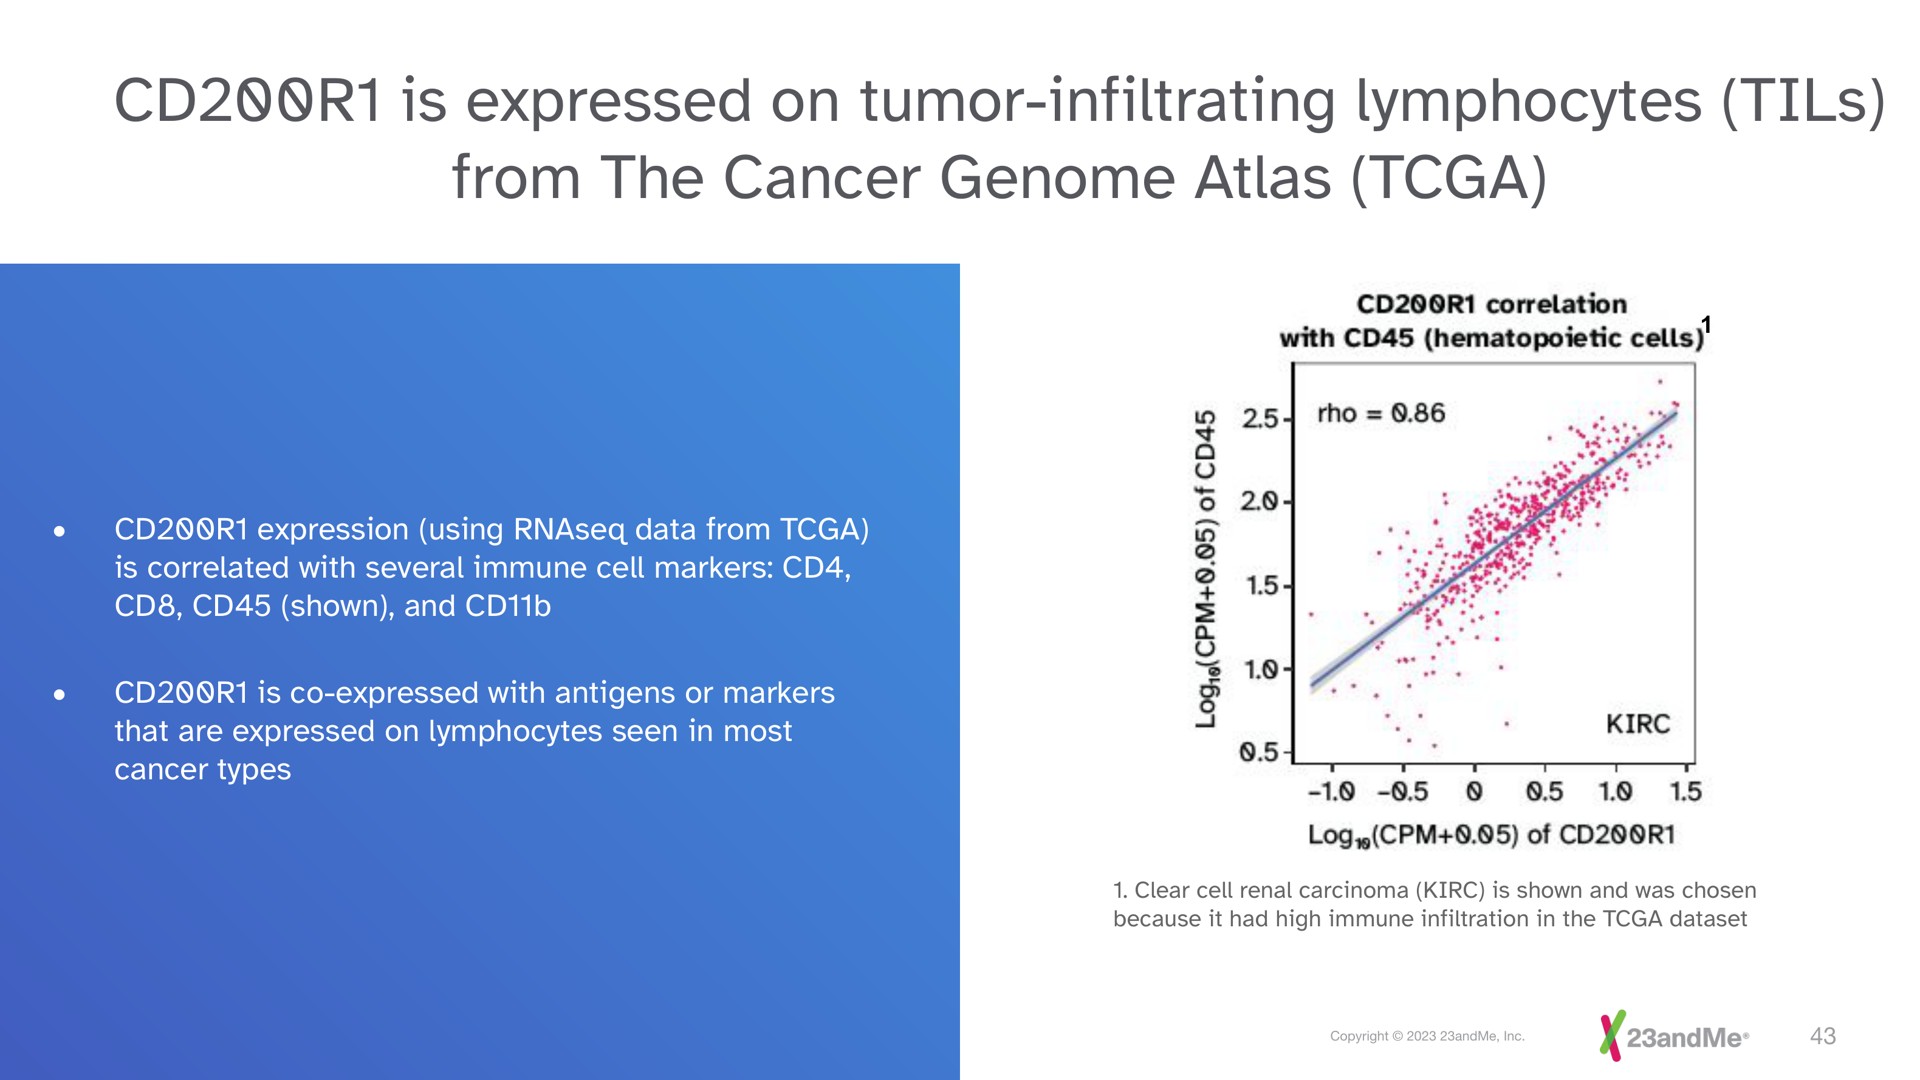 is expressed on tumor infiltrating lymphocytes from the cancer genome atlas | 23andMe